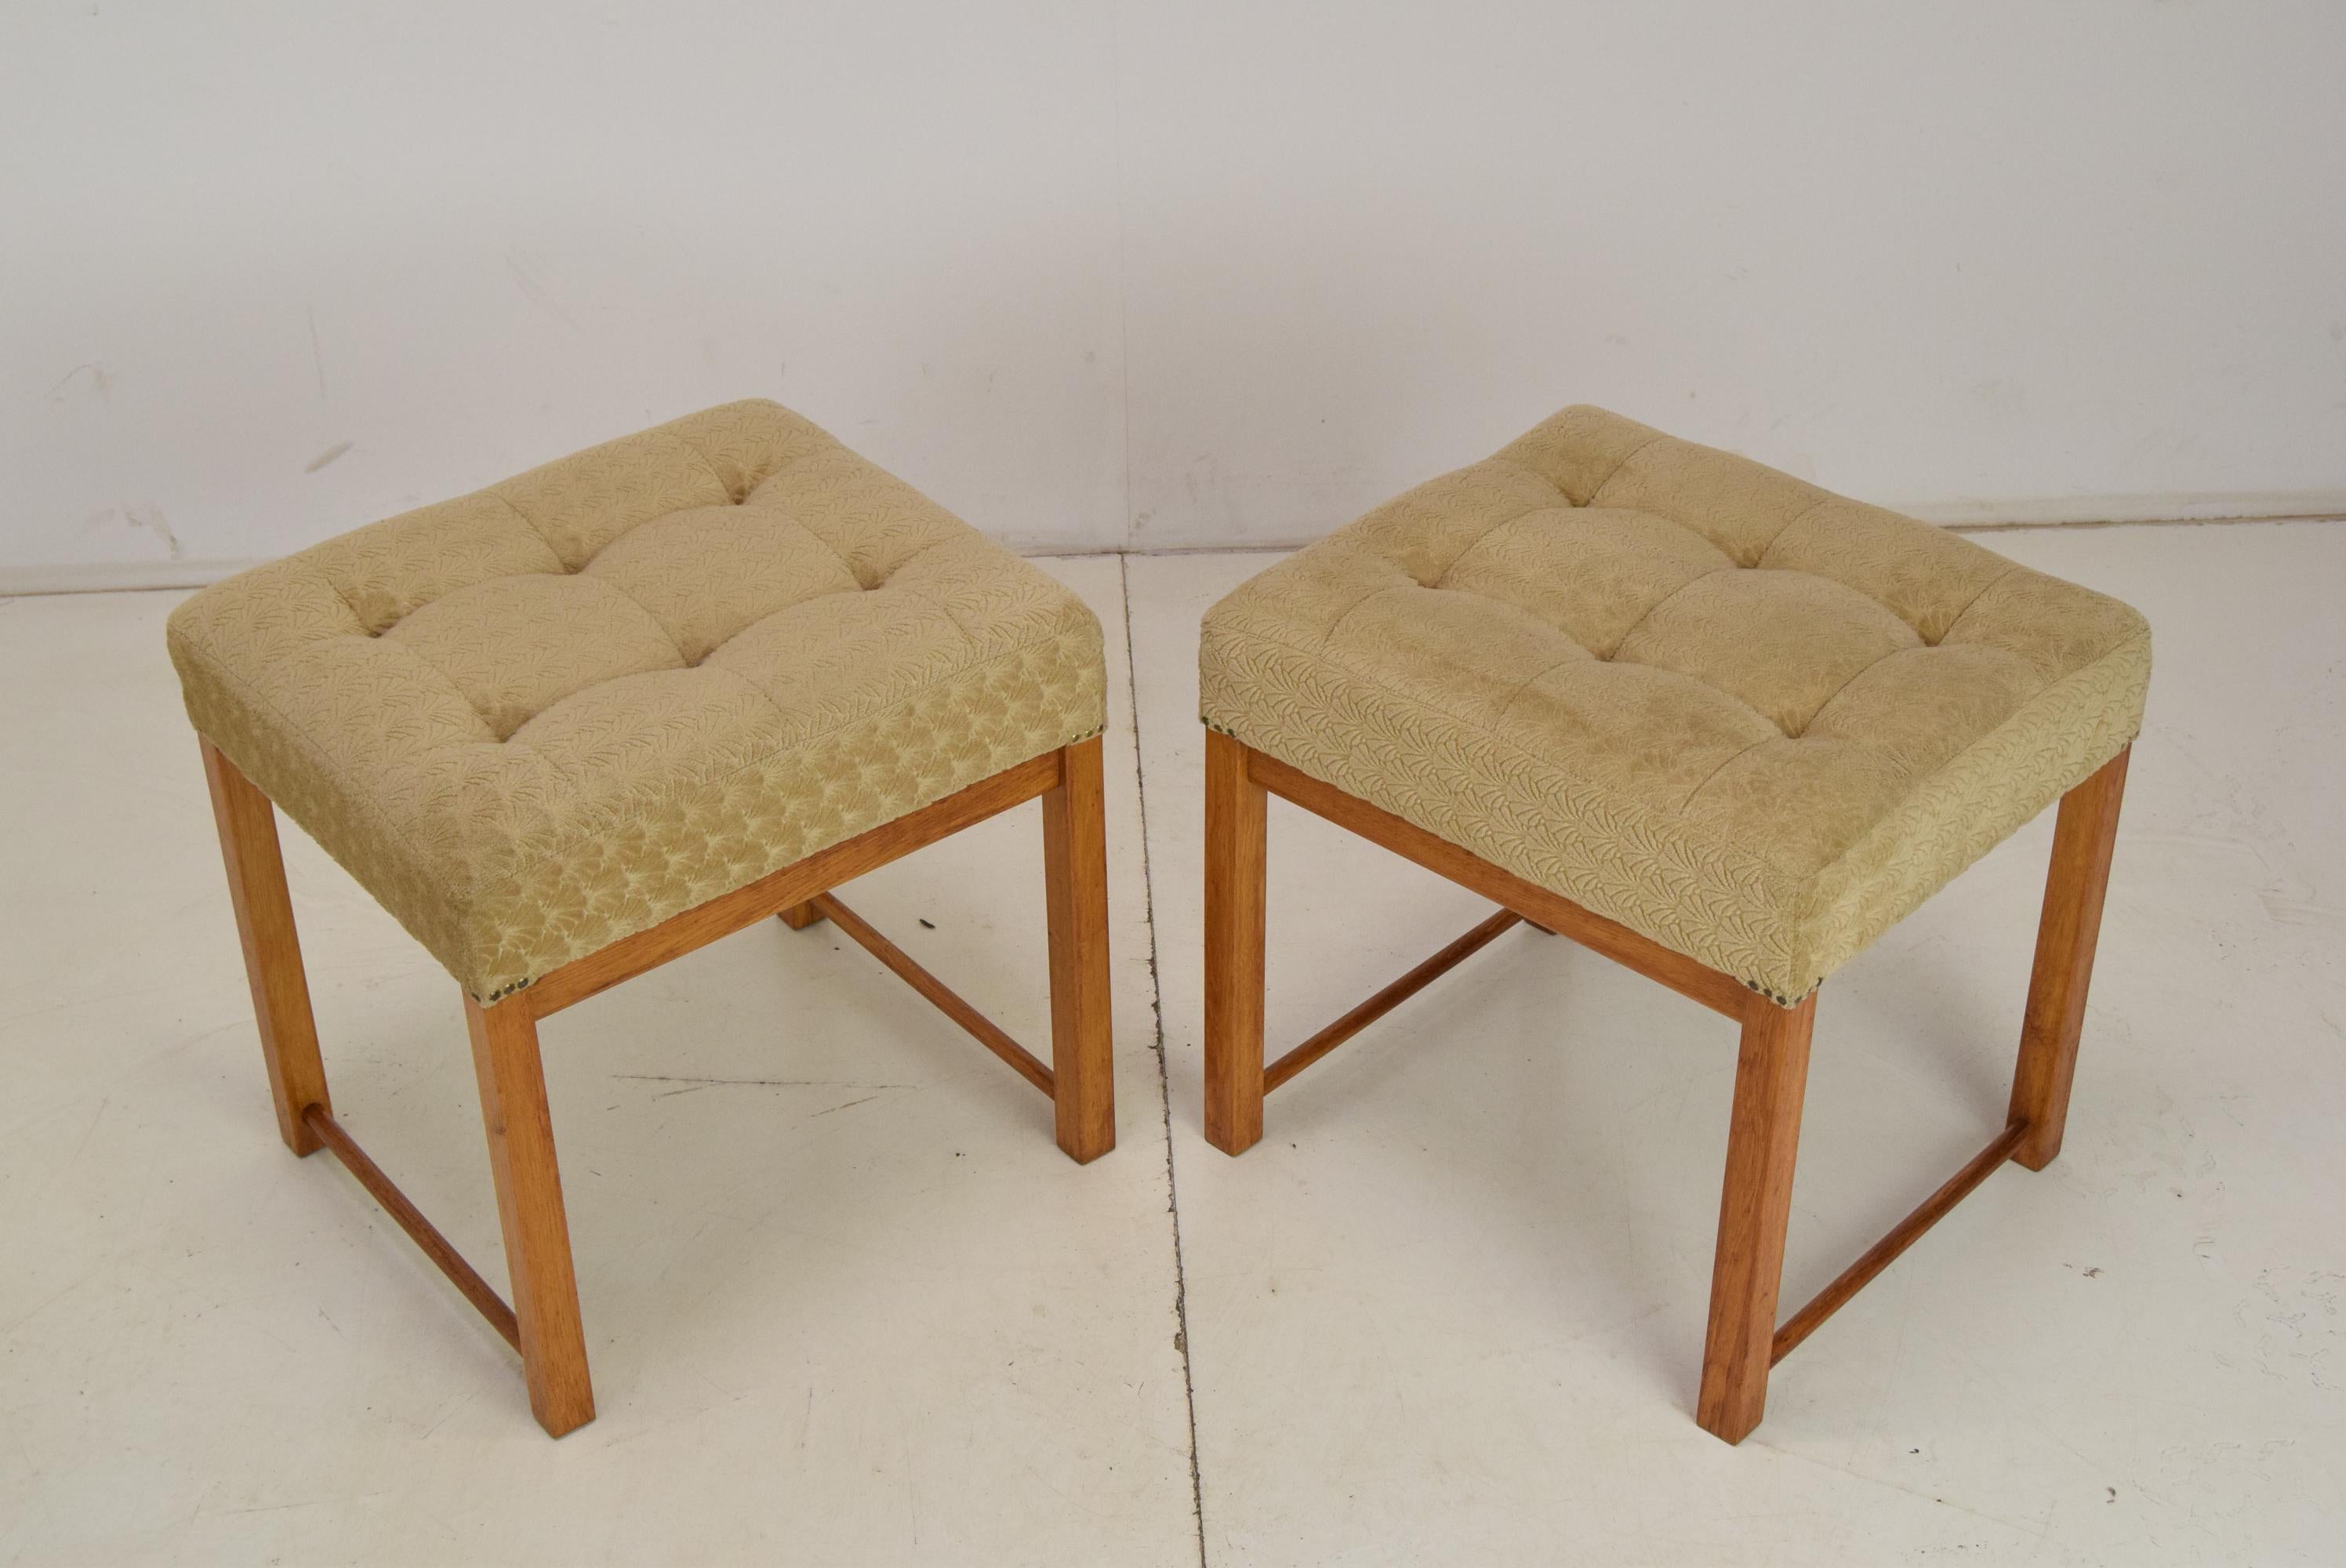 Made in Czechoslovakia
Made of fabric, wood
The fabric shows signs of use
Good original condition.